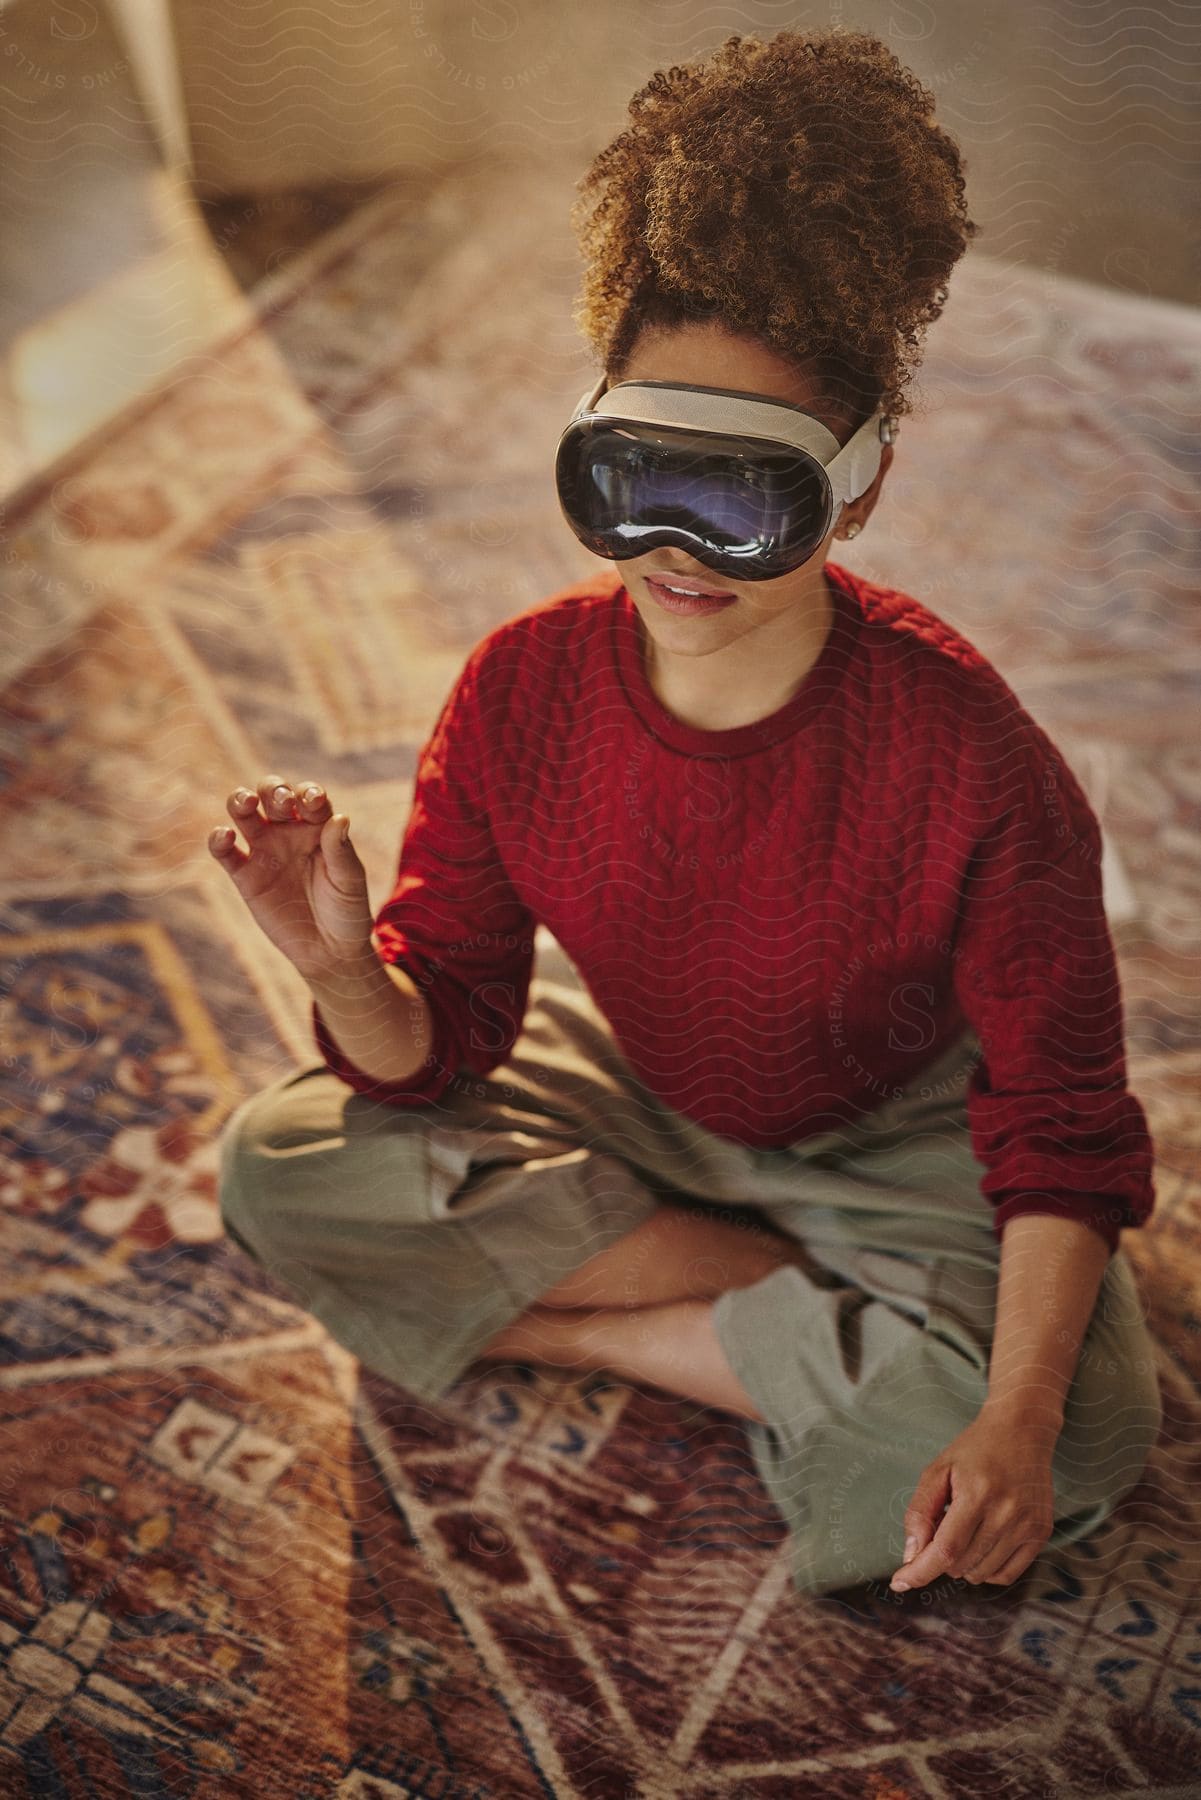 Young woman sitting on carpet with one hand raised using virtual reality glasses